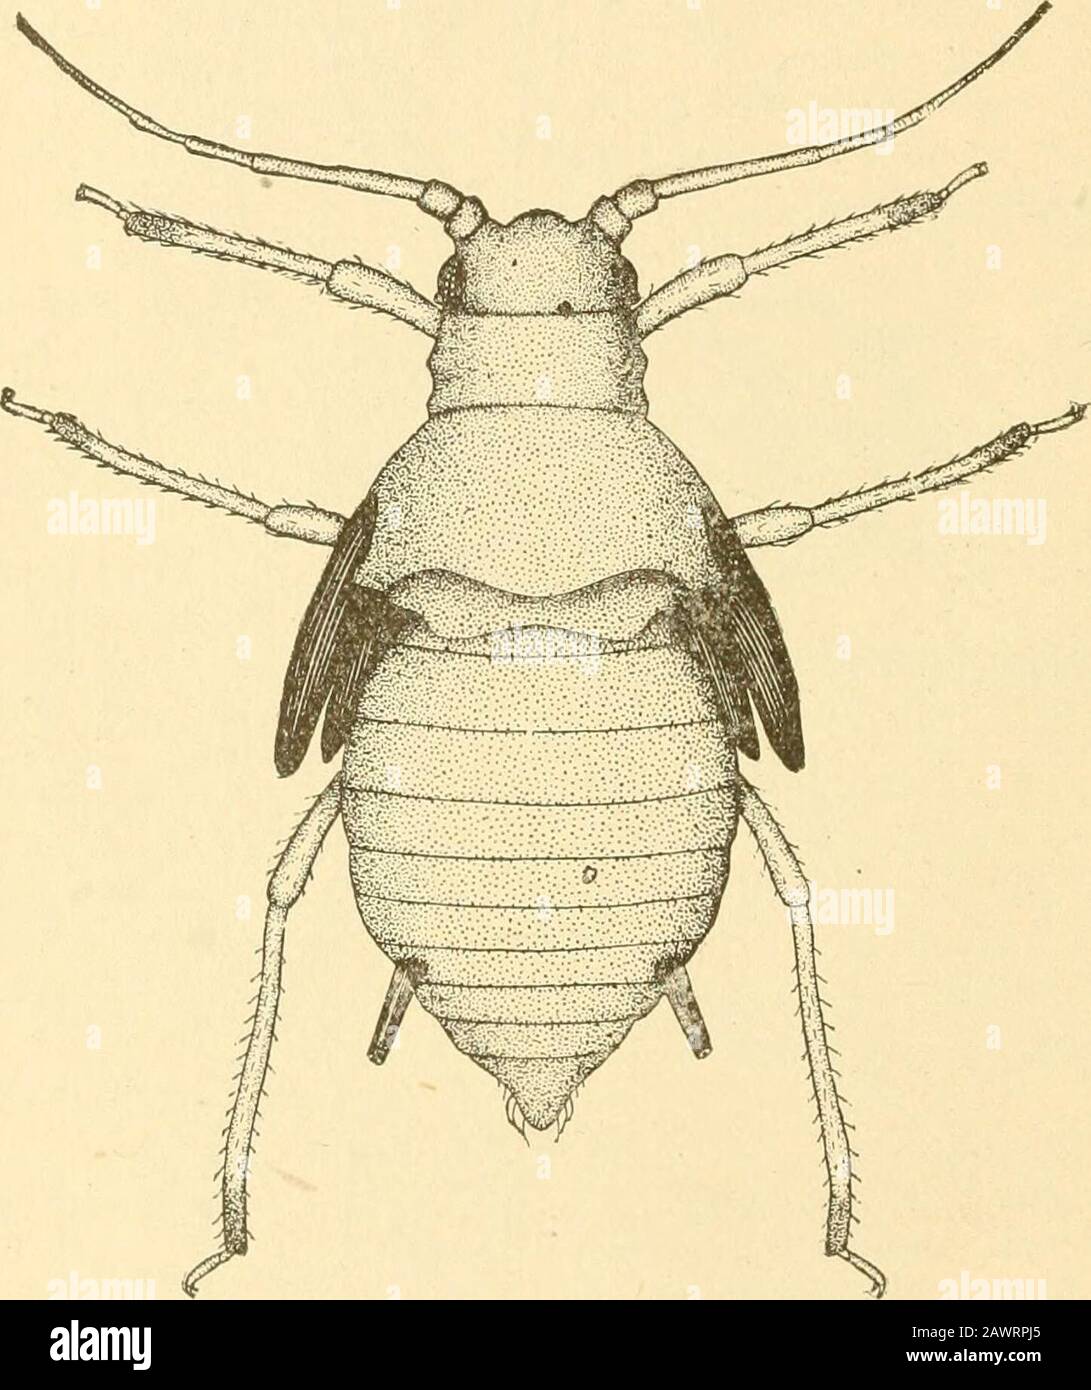 Report of the State Entomologist on the noxious and beneficial insects of the state of Illinois . NGED FEMALE. Head black, with red or black eyes, the latter usually with a redtubercle behind. Thorax sometimes jet black throughout, sometimeswith the prothorax yellowish. Abdomen yellowish-green with blackedges, and with blackish margins to segments. Legs yellow, withcoxfe, tarsi, and distal parts of tibiae and femora dusky or black.€ornicles cylindrical, black; tail yellowish, rostrum yellow, with—6 86 black tip. The antennae are six-jointed, (apparently seven), the sixthwith a setaceous tip th Stock Photo